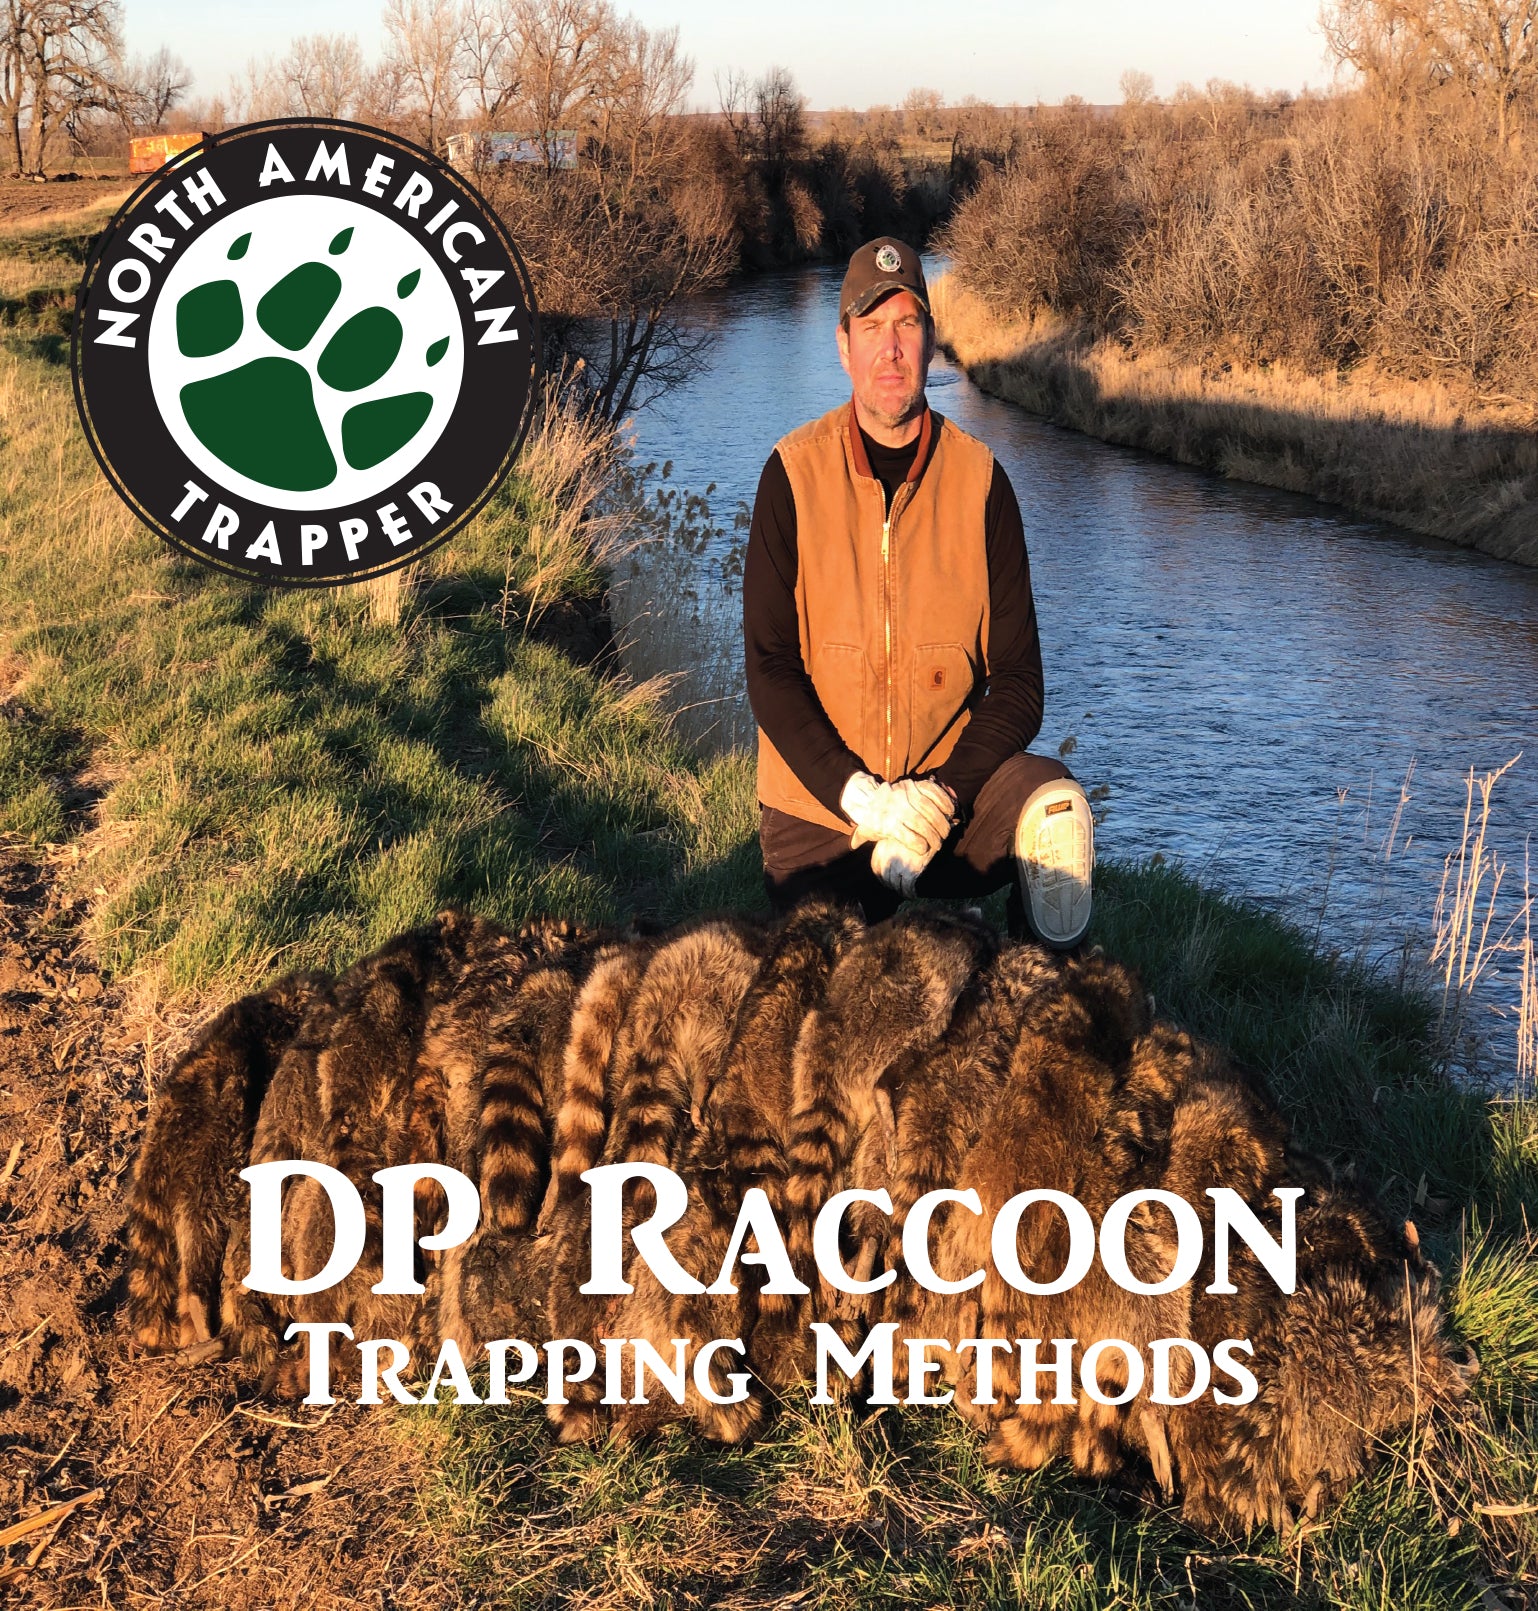 Dog Proof Coon Trap - Texas Direct Hunting Products